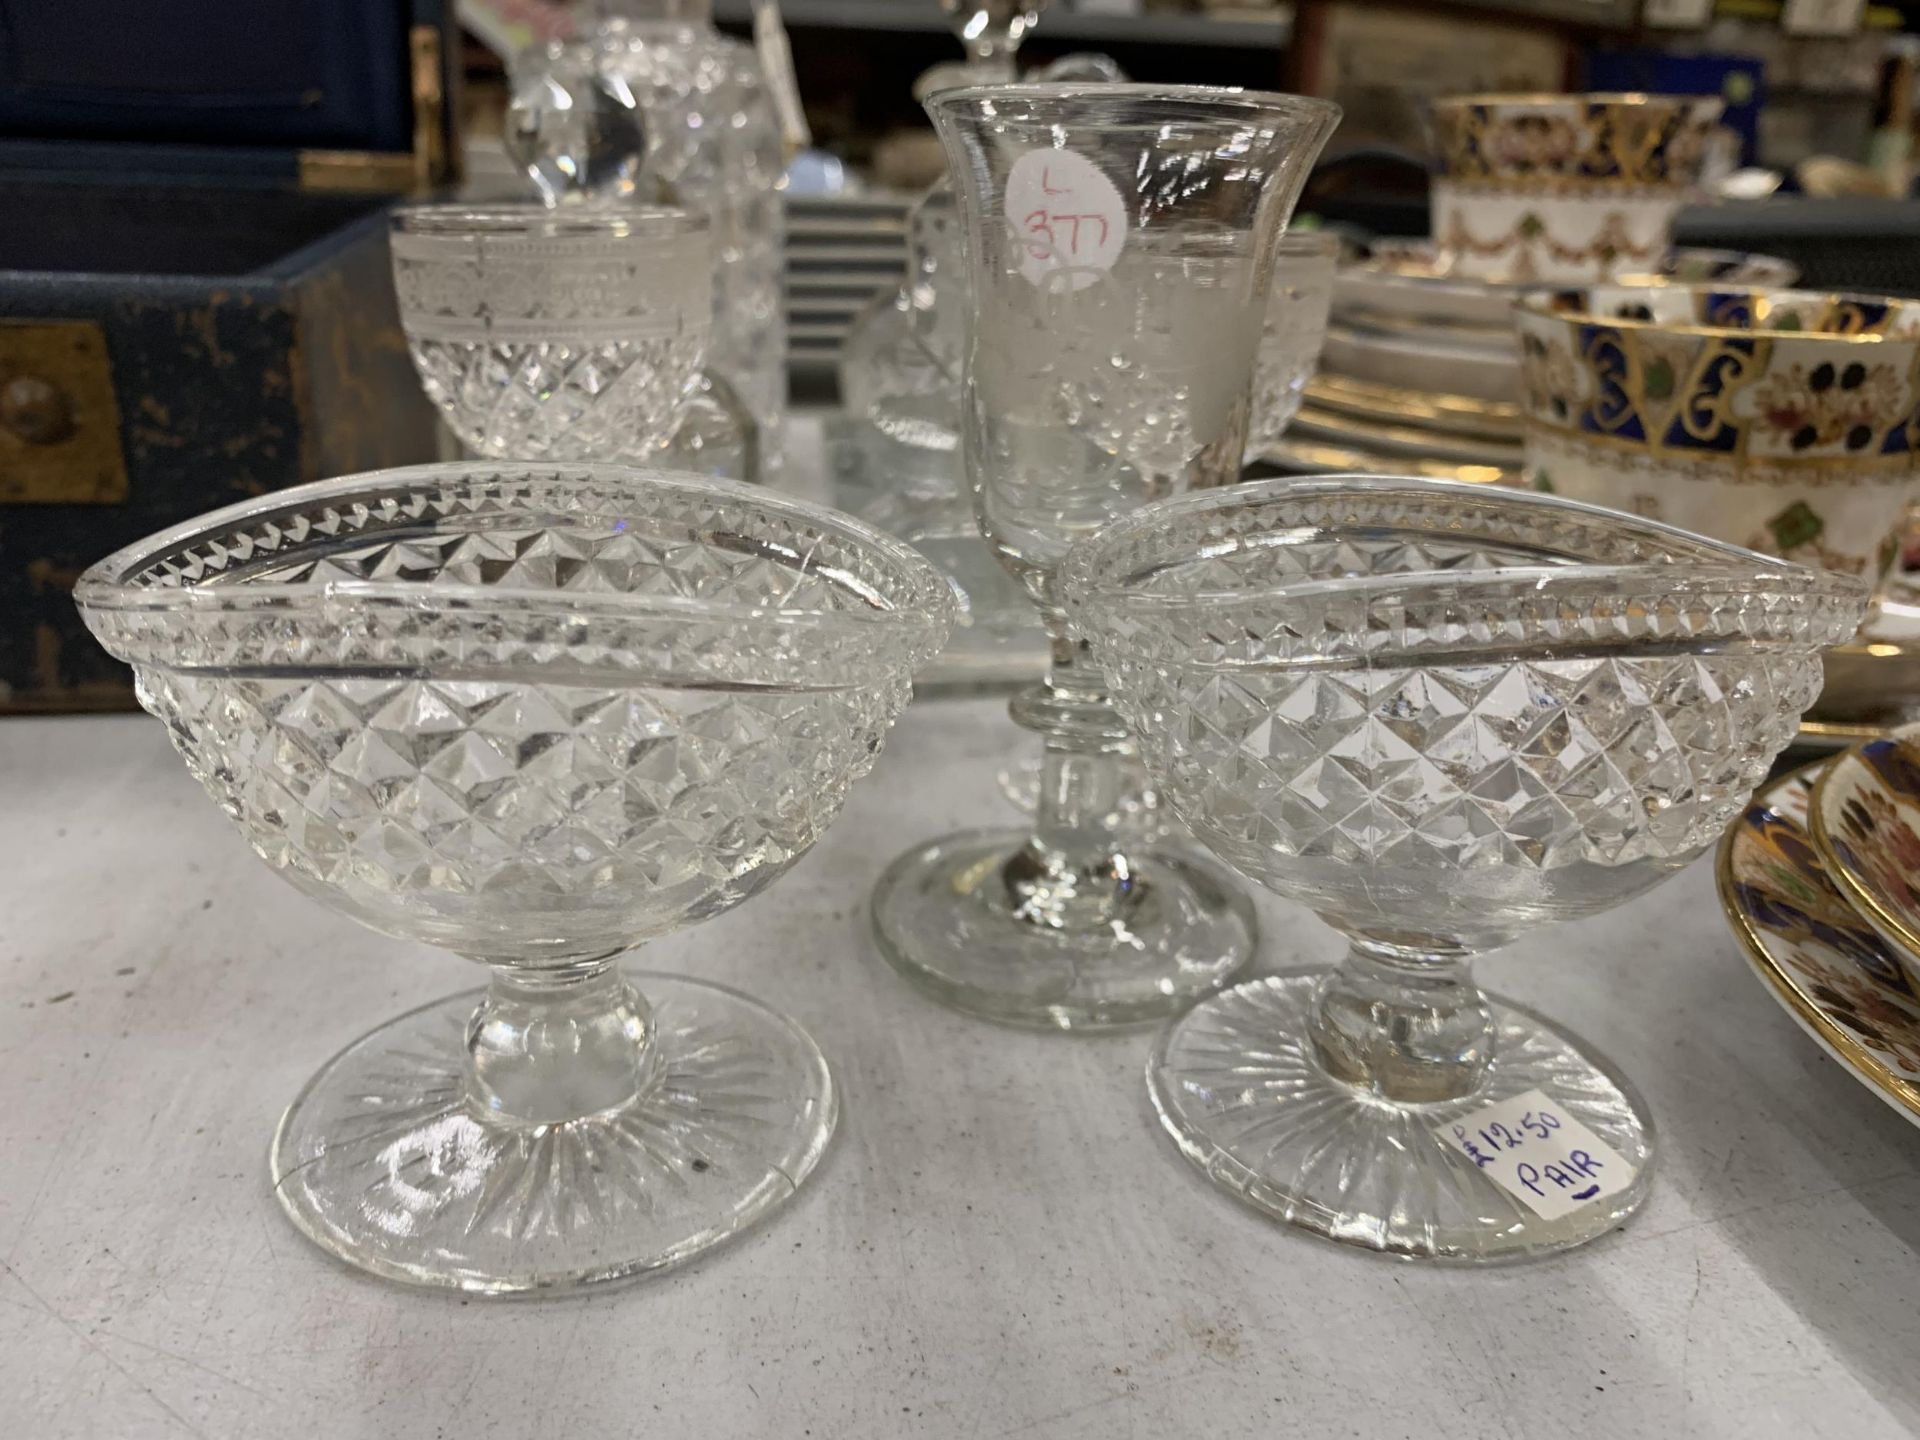 A COLLECTION OF 19TH CENTURY AND LATER GLASSWARE, CUT GLASS DECANTER, ETCHED GLASS ETC - Image 4 of 4